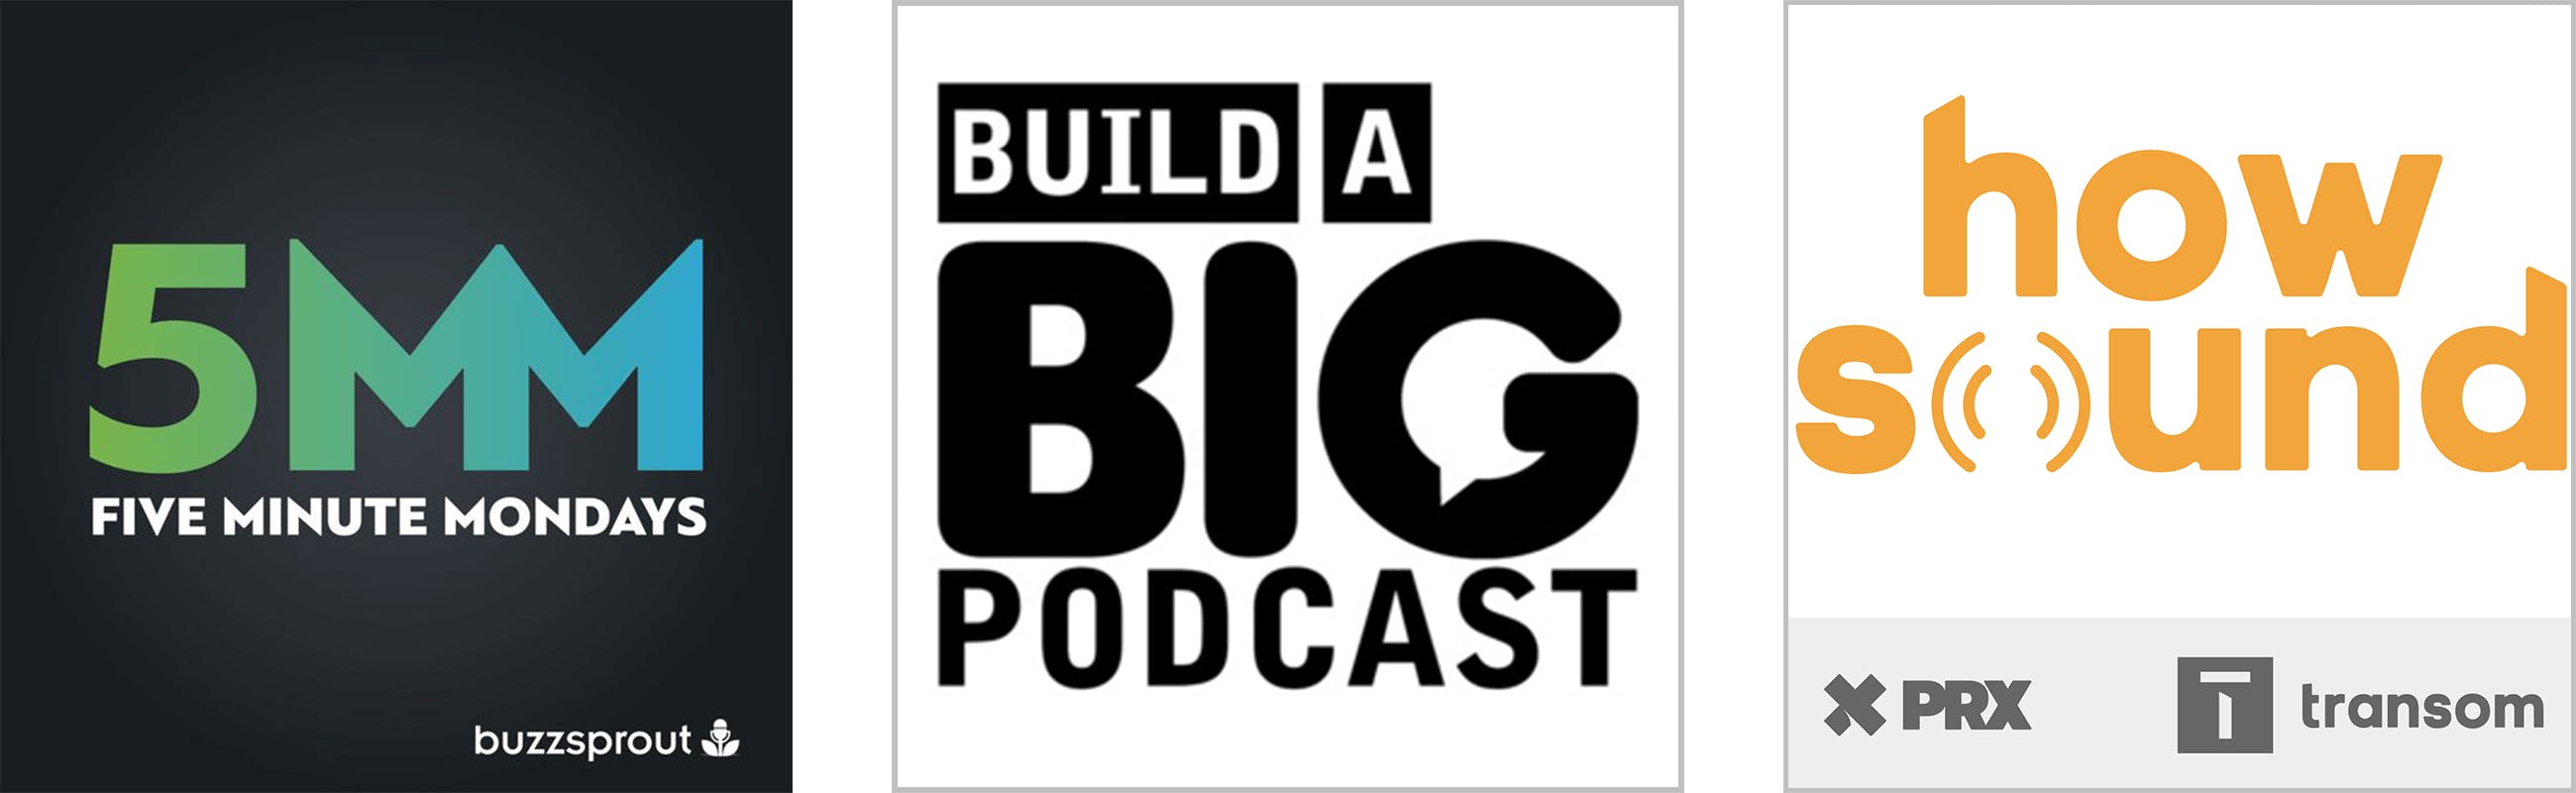 Podcasting tips podcasts